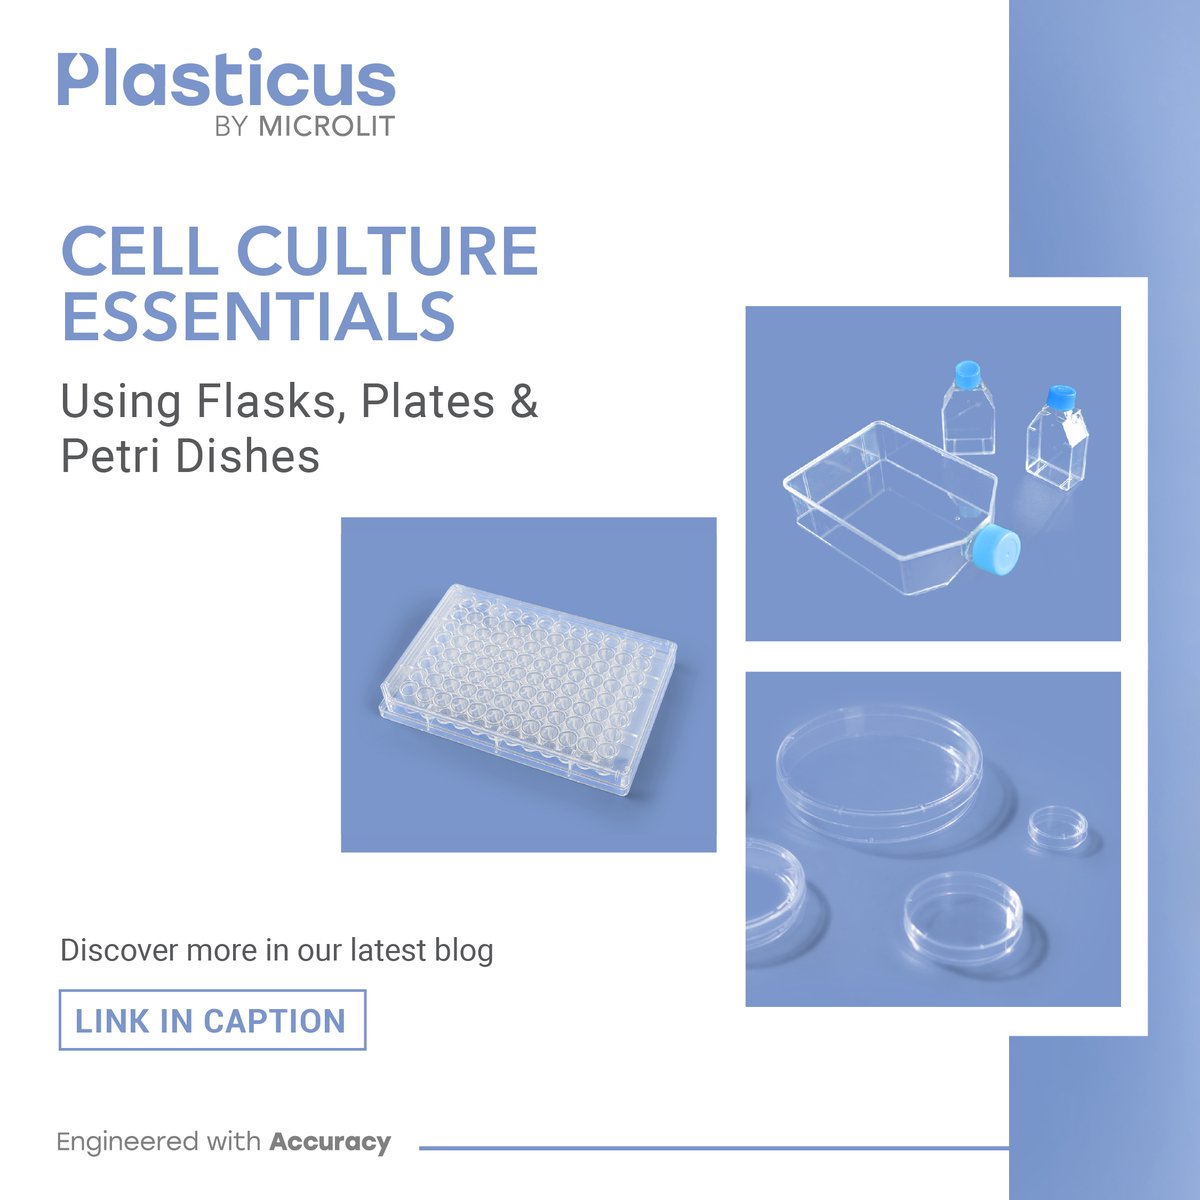 In the realm of cell culture, the significance of flasks, plates and petri dishes cannot be overstated. 

To read our blog: microlit.com/cell-culture-e…

#Plasticus #PlasticusBlog #Blogs #Plates #PetriDish #CellBehaviour #CellCulture #EngineeredwithAccuracy #ExperiencePrecision